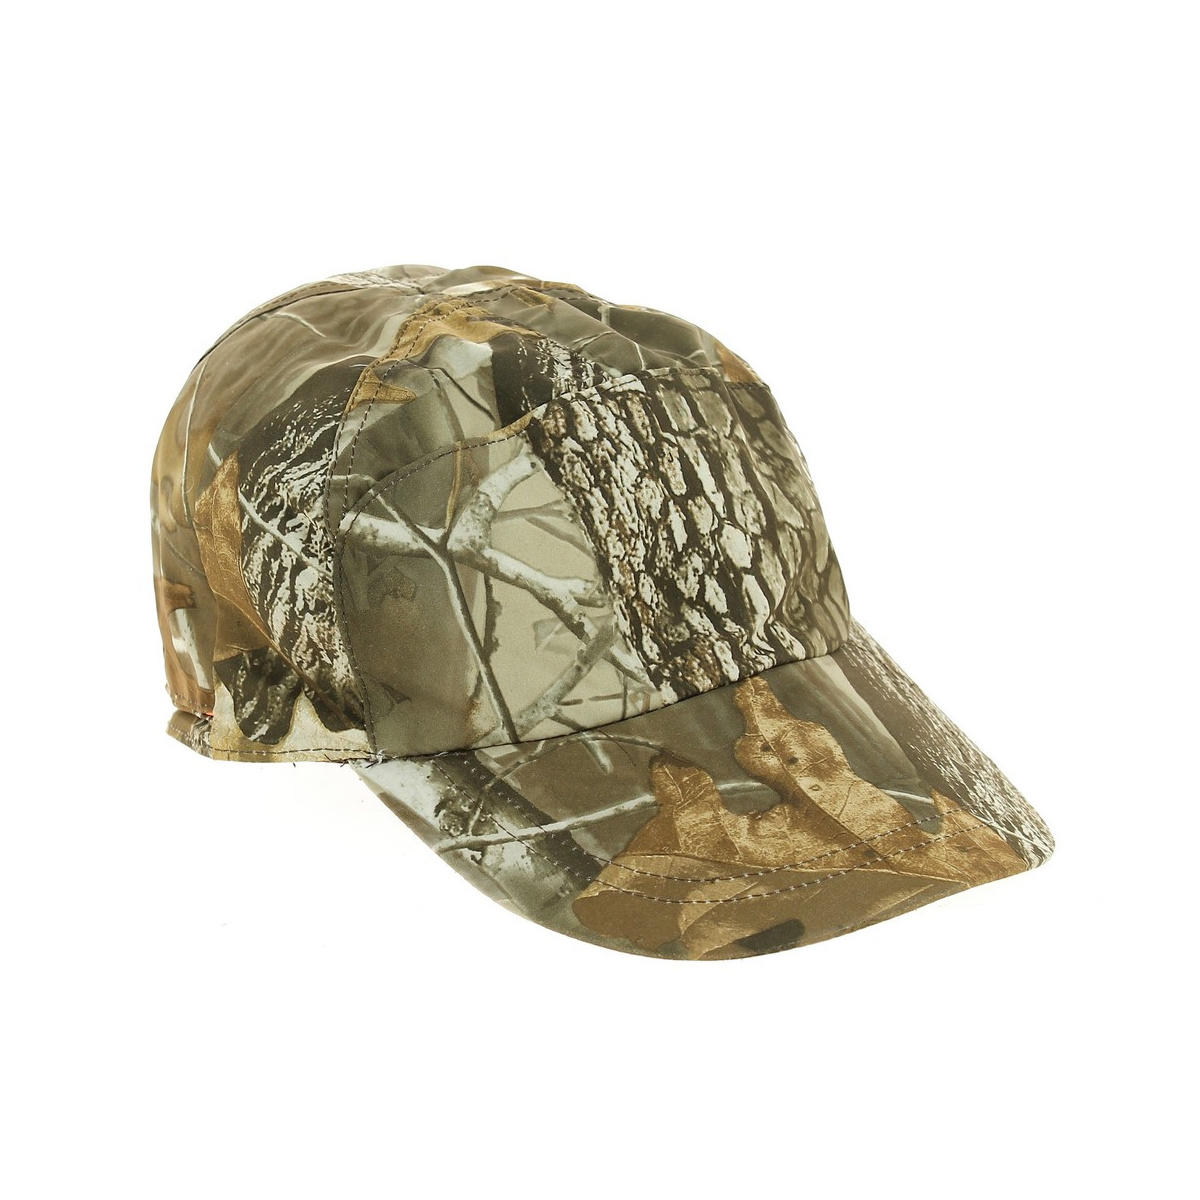 Bonnet casquette Camouflage - TRACLET - Chapellerie Traclet Reference : 737